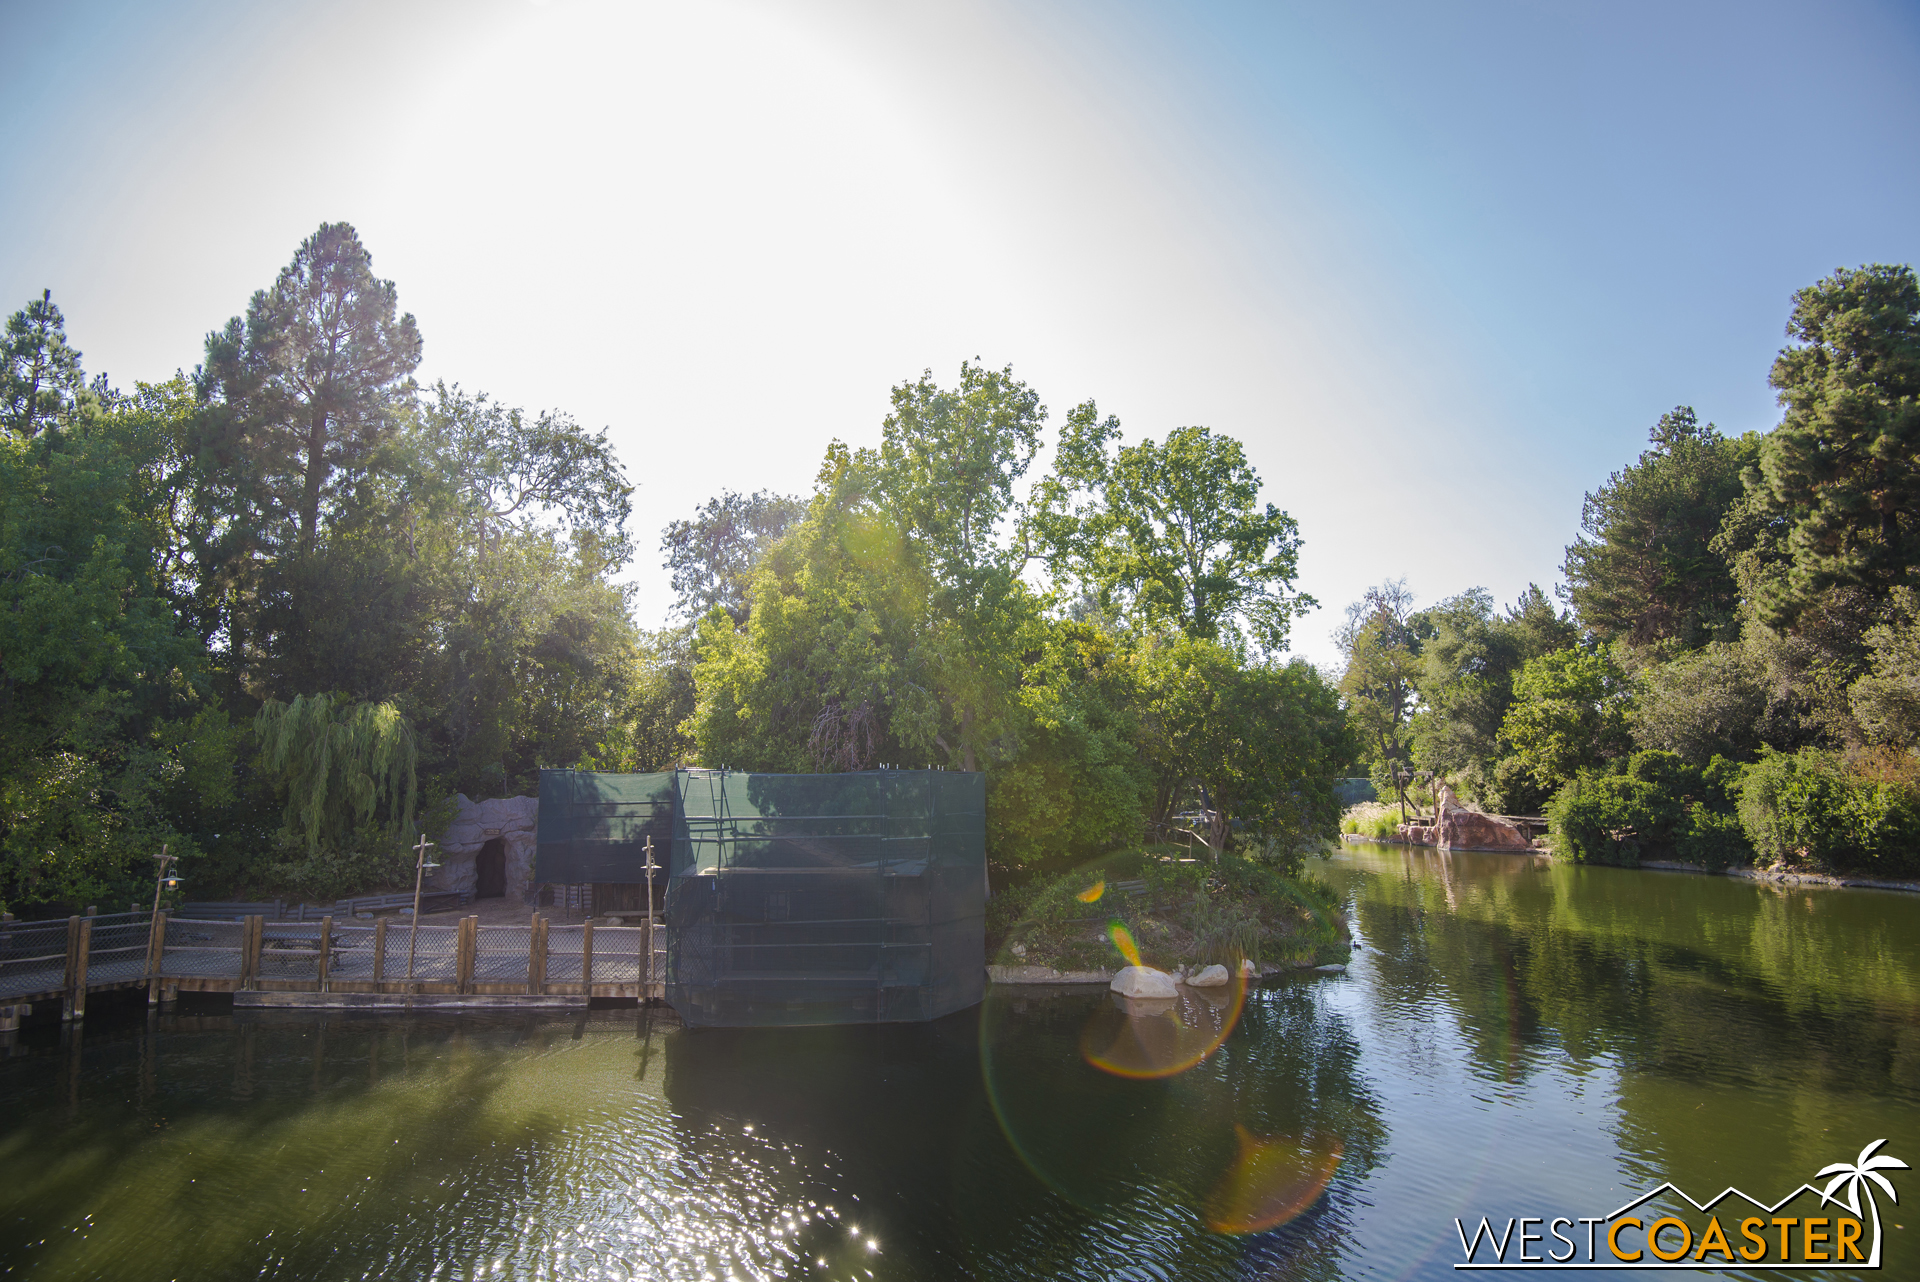  Now moving around the riverbend toward the interior of the east side of the Rivers of America. 